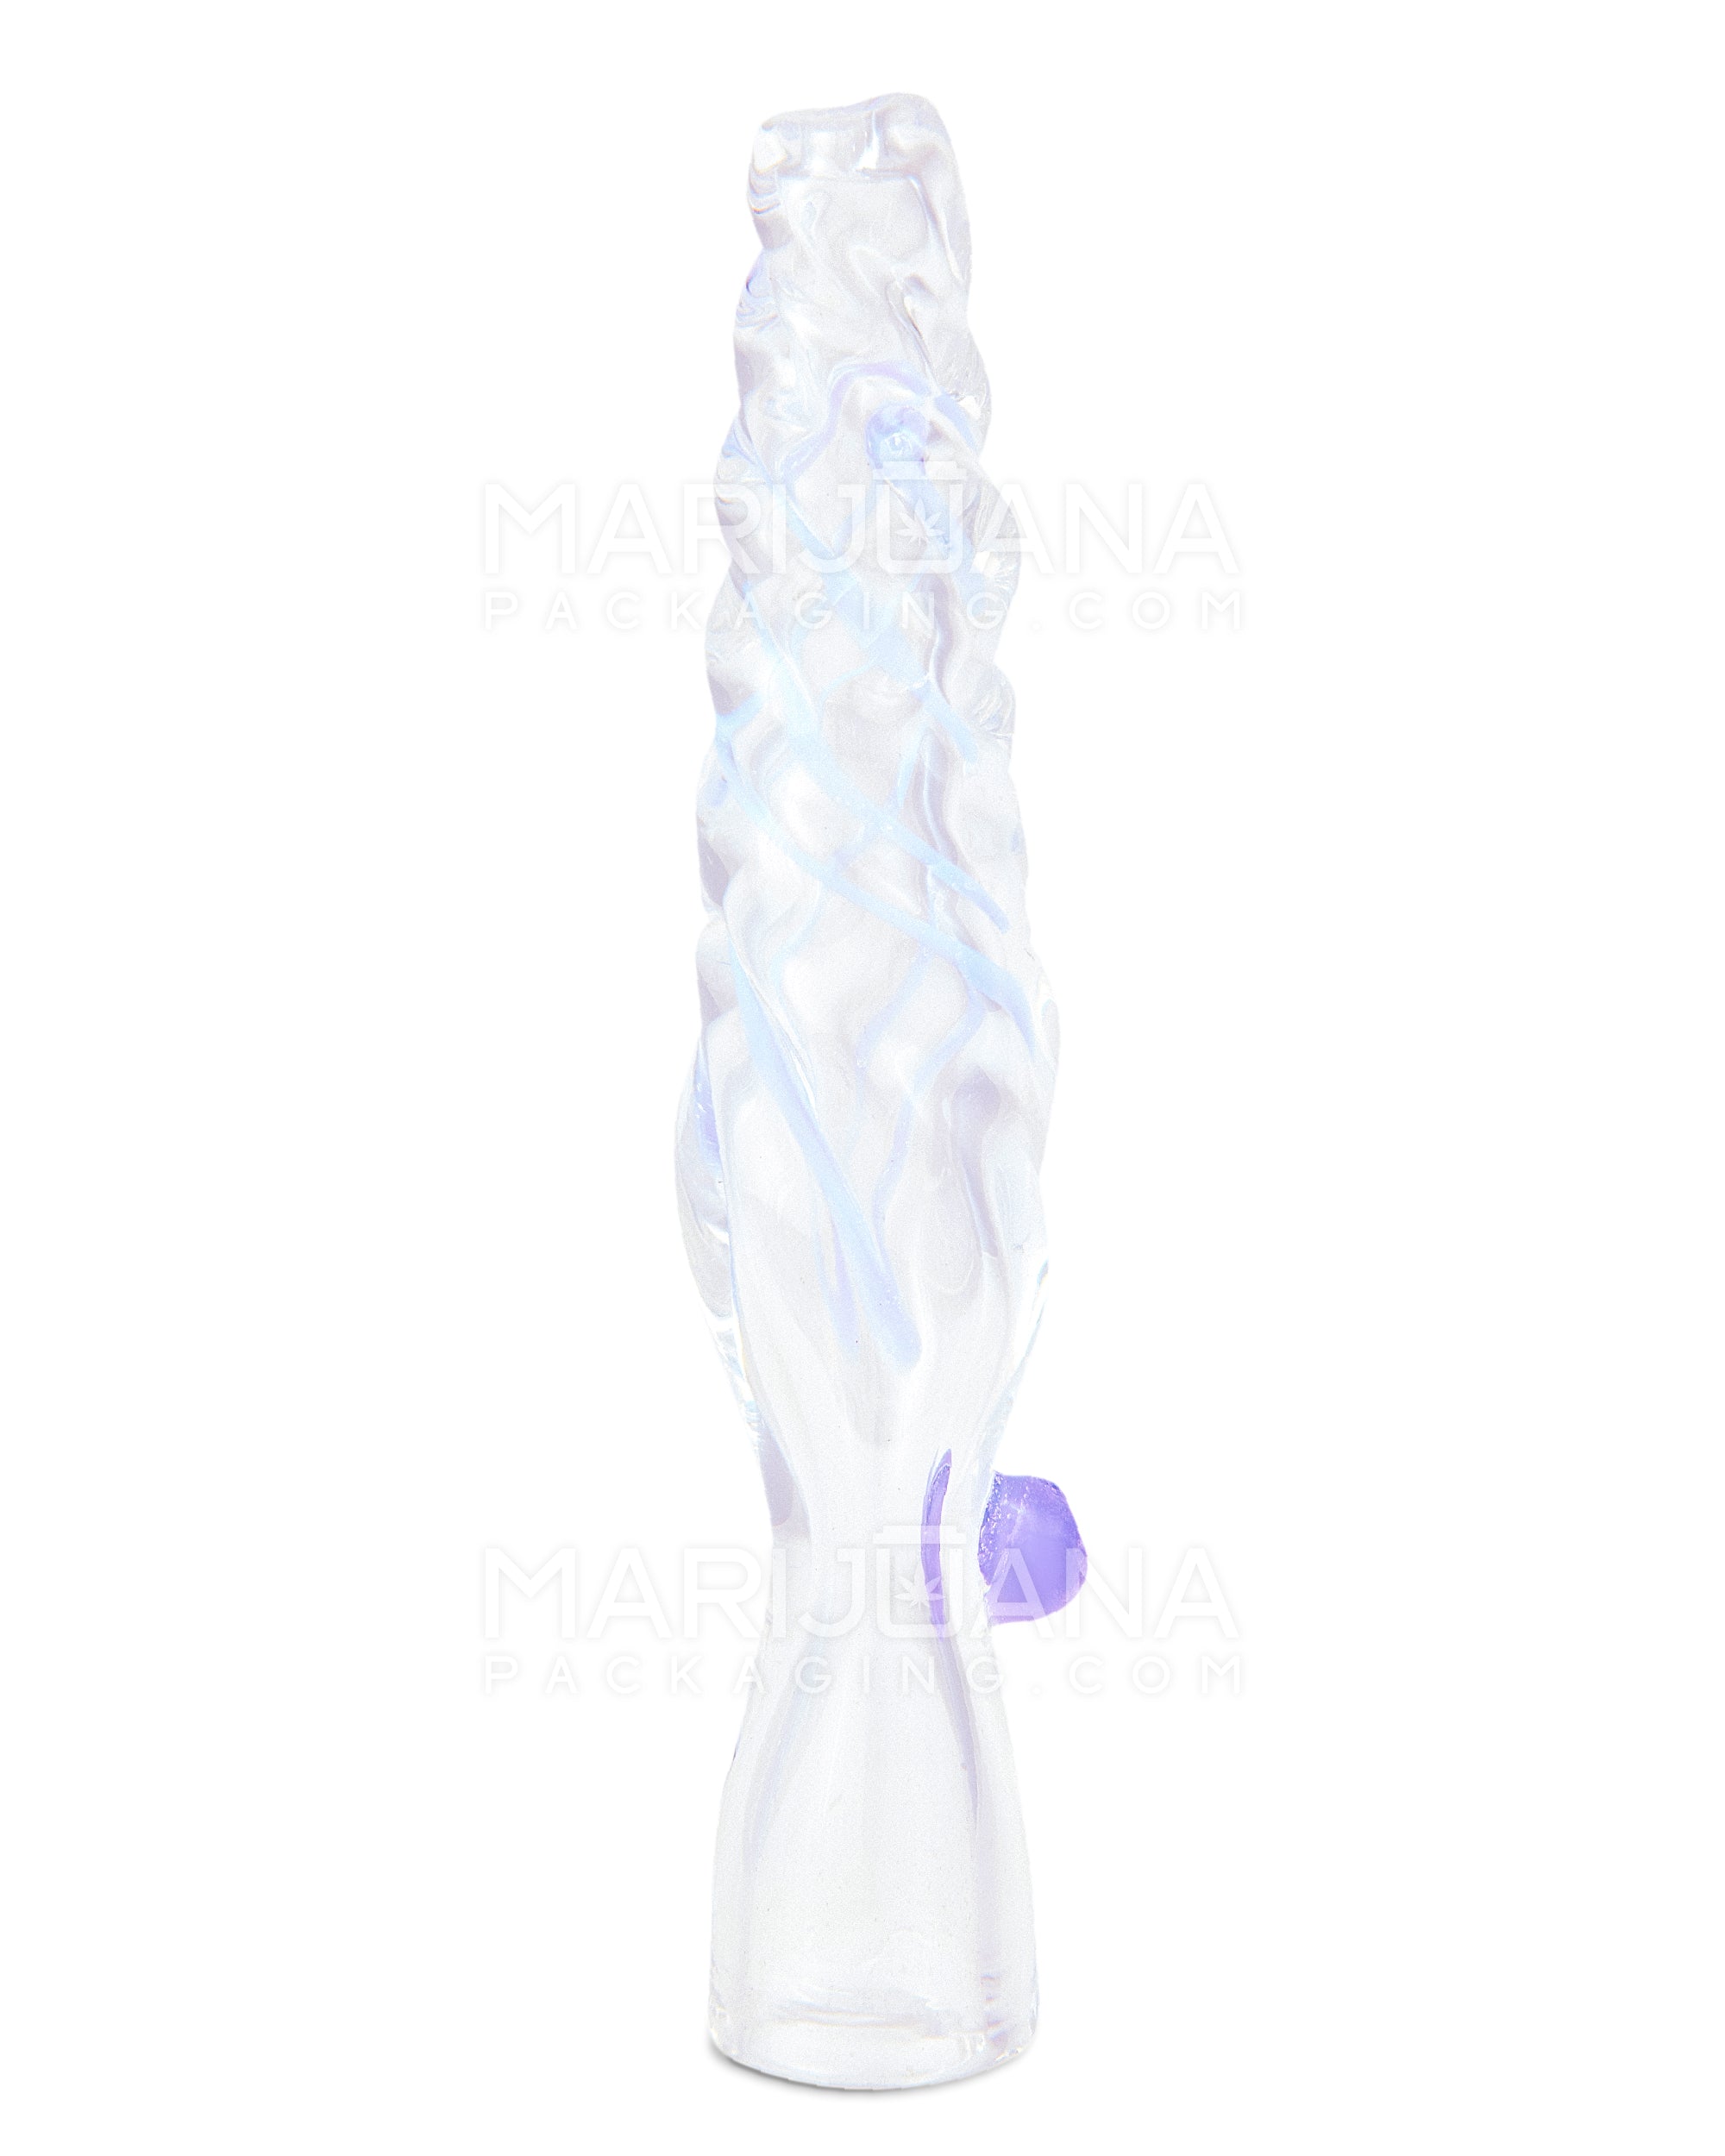 Spiral Chillum Hand Pipe w/ Knocker | 3.75in Long - Glass - Assorted - 1